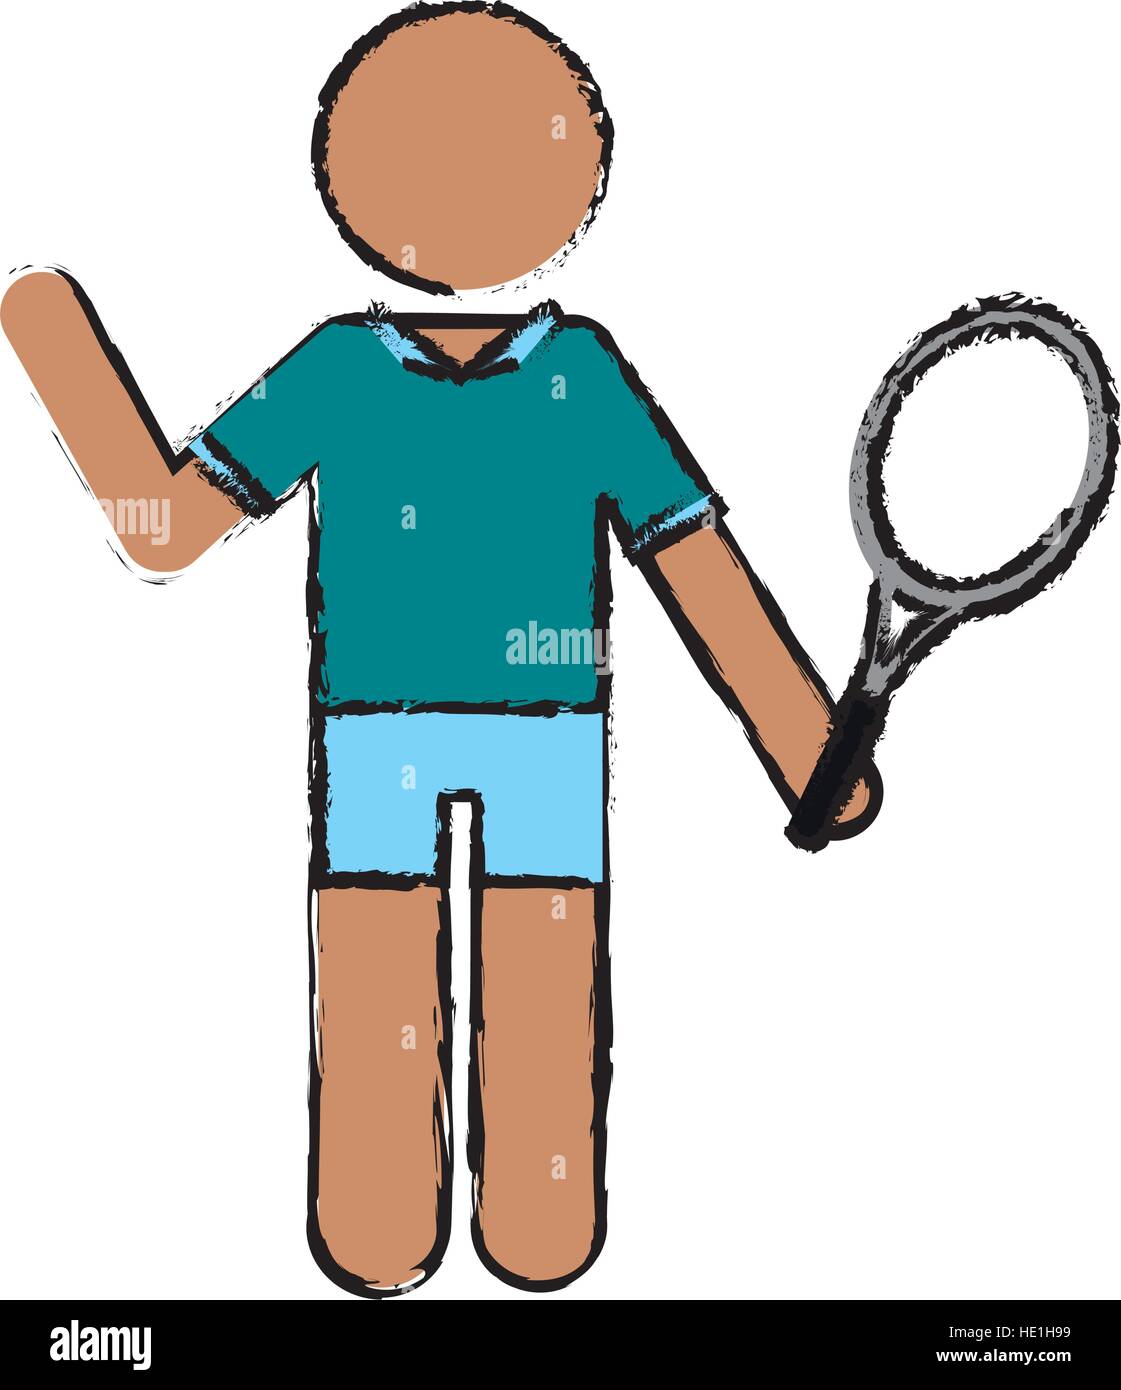 drawing character player tennis and racket Stock Vector